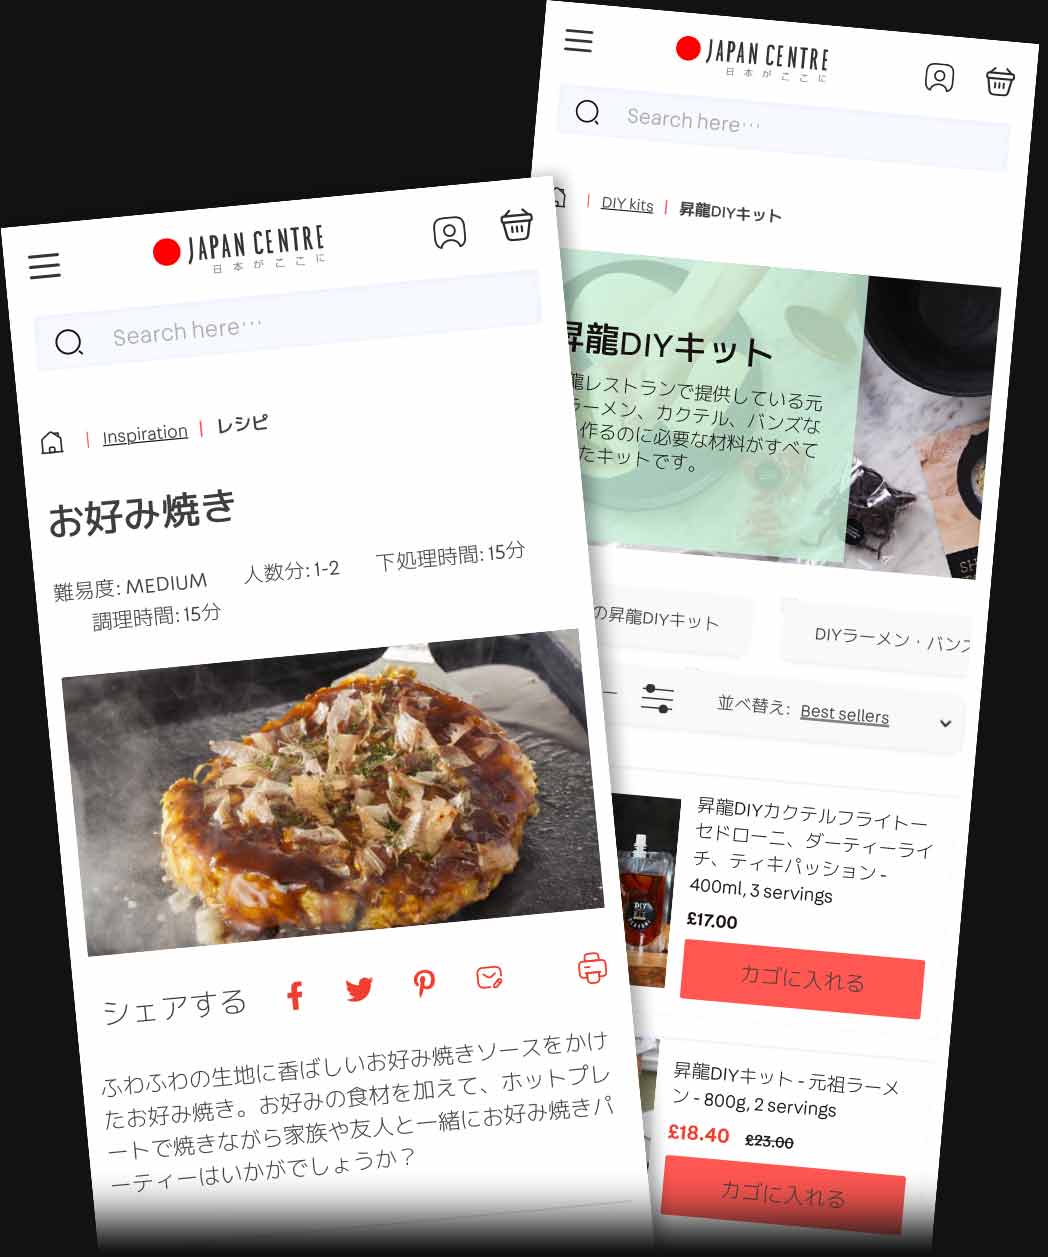 Mobile pages in Japanese